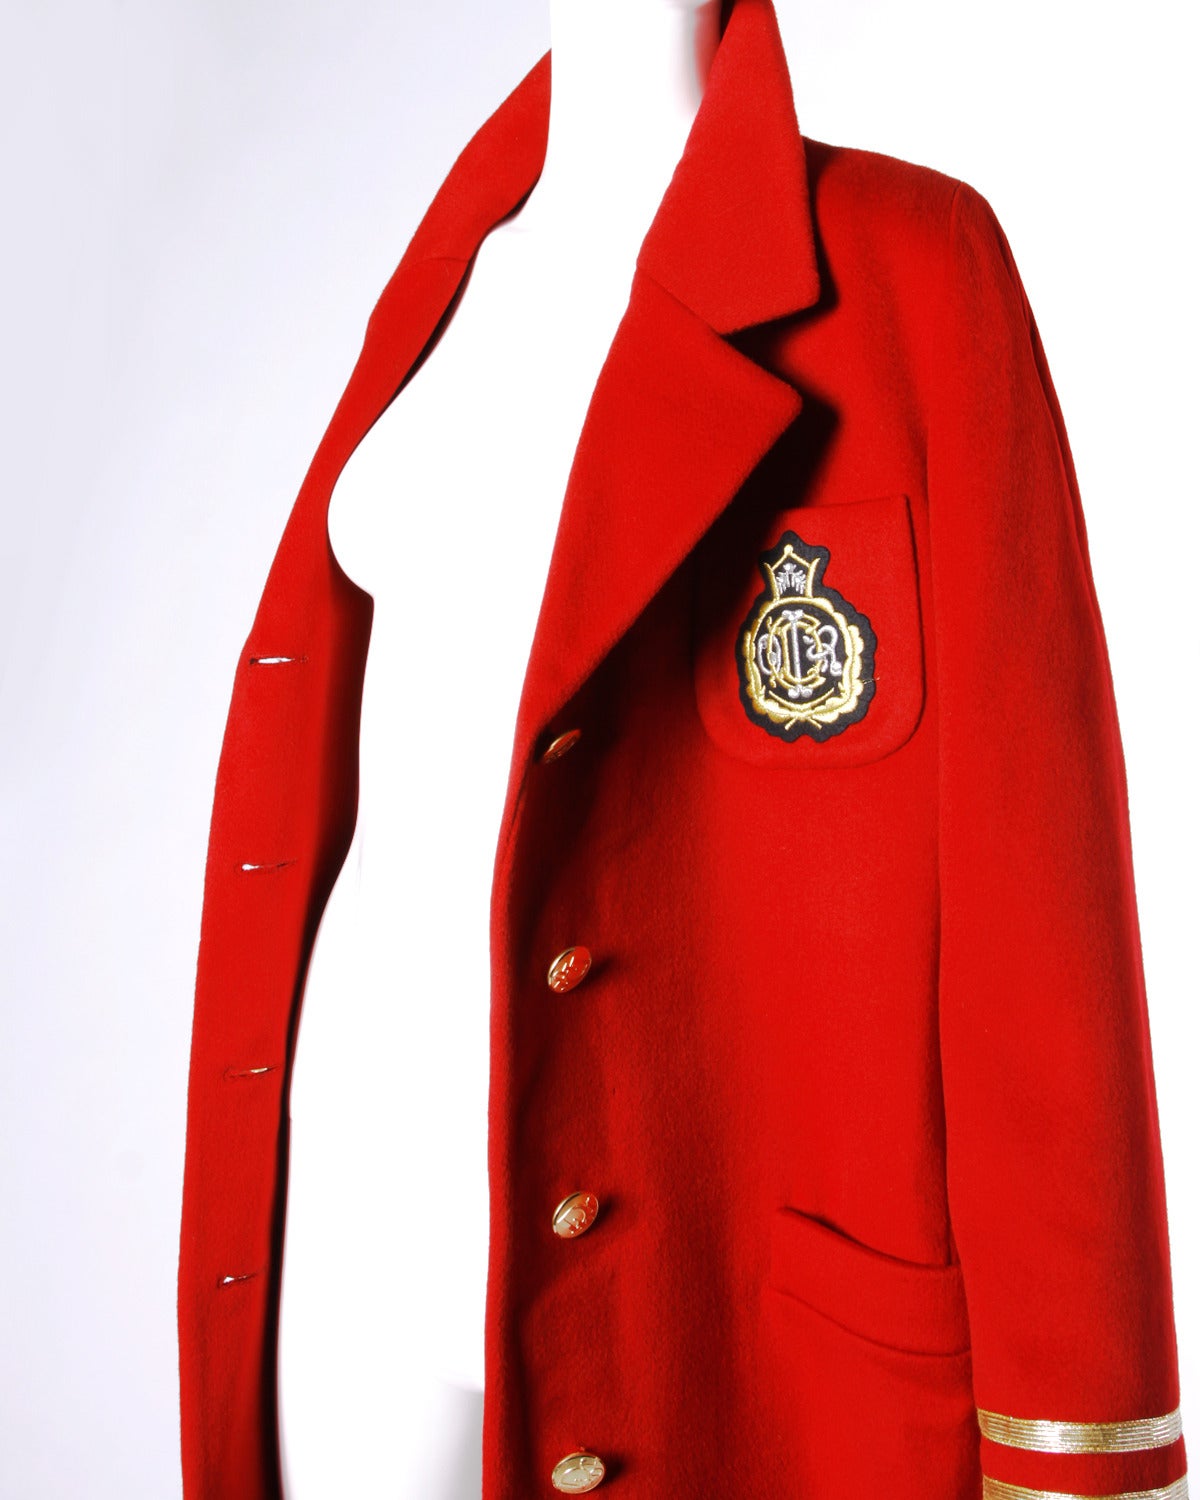 Heavy vintage military-inspired coat by Christian Dior. Gold striped sleeves and military crest on the front breast.

Details:

Fully Lined
Shoulder Pads Sewn Into Lining
Front Button Closure
Color: Red
Fabric: Wool
Label: Christian